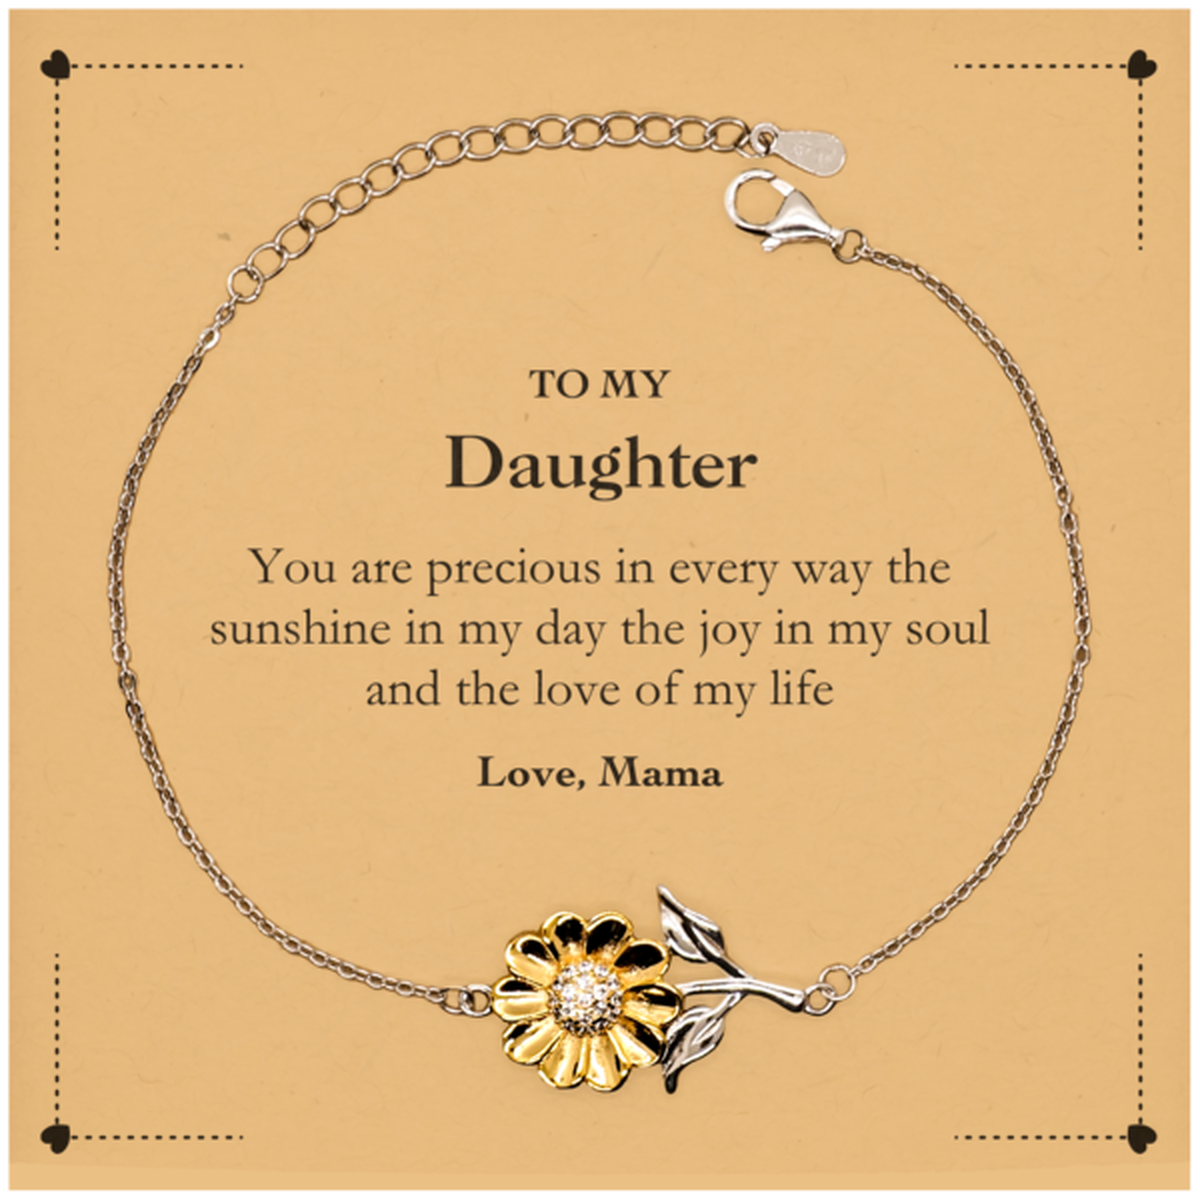 Graduation Gifts for Daughter Sunflower Bracelet Present from Mama, Christmas Daughter Birthday Gifts Daughter You are precious in every way the sunshine in my day. Love, Mama